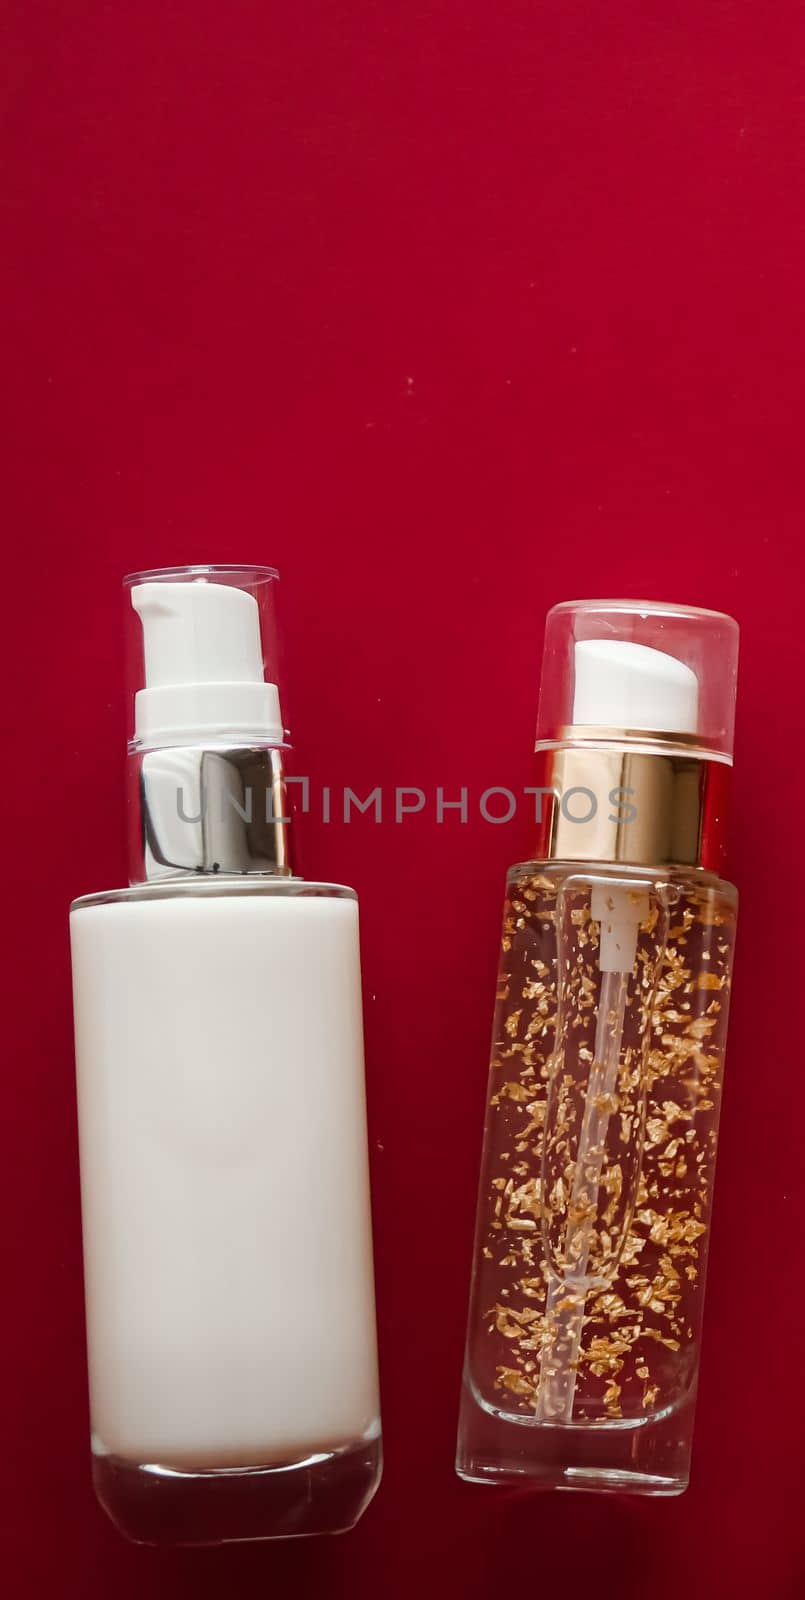 Beauty cosmetics and skincare product on red background, flatlay.